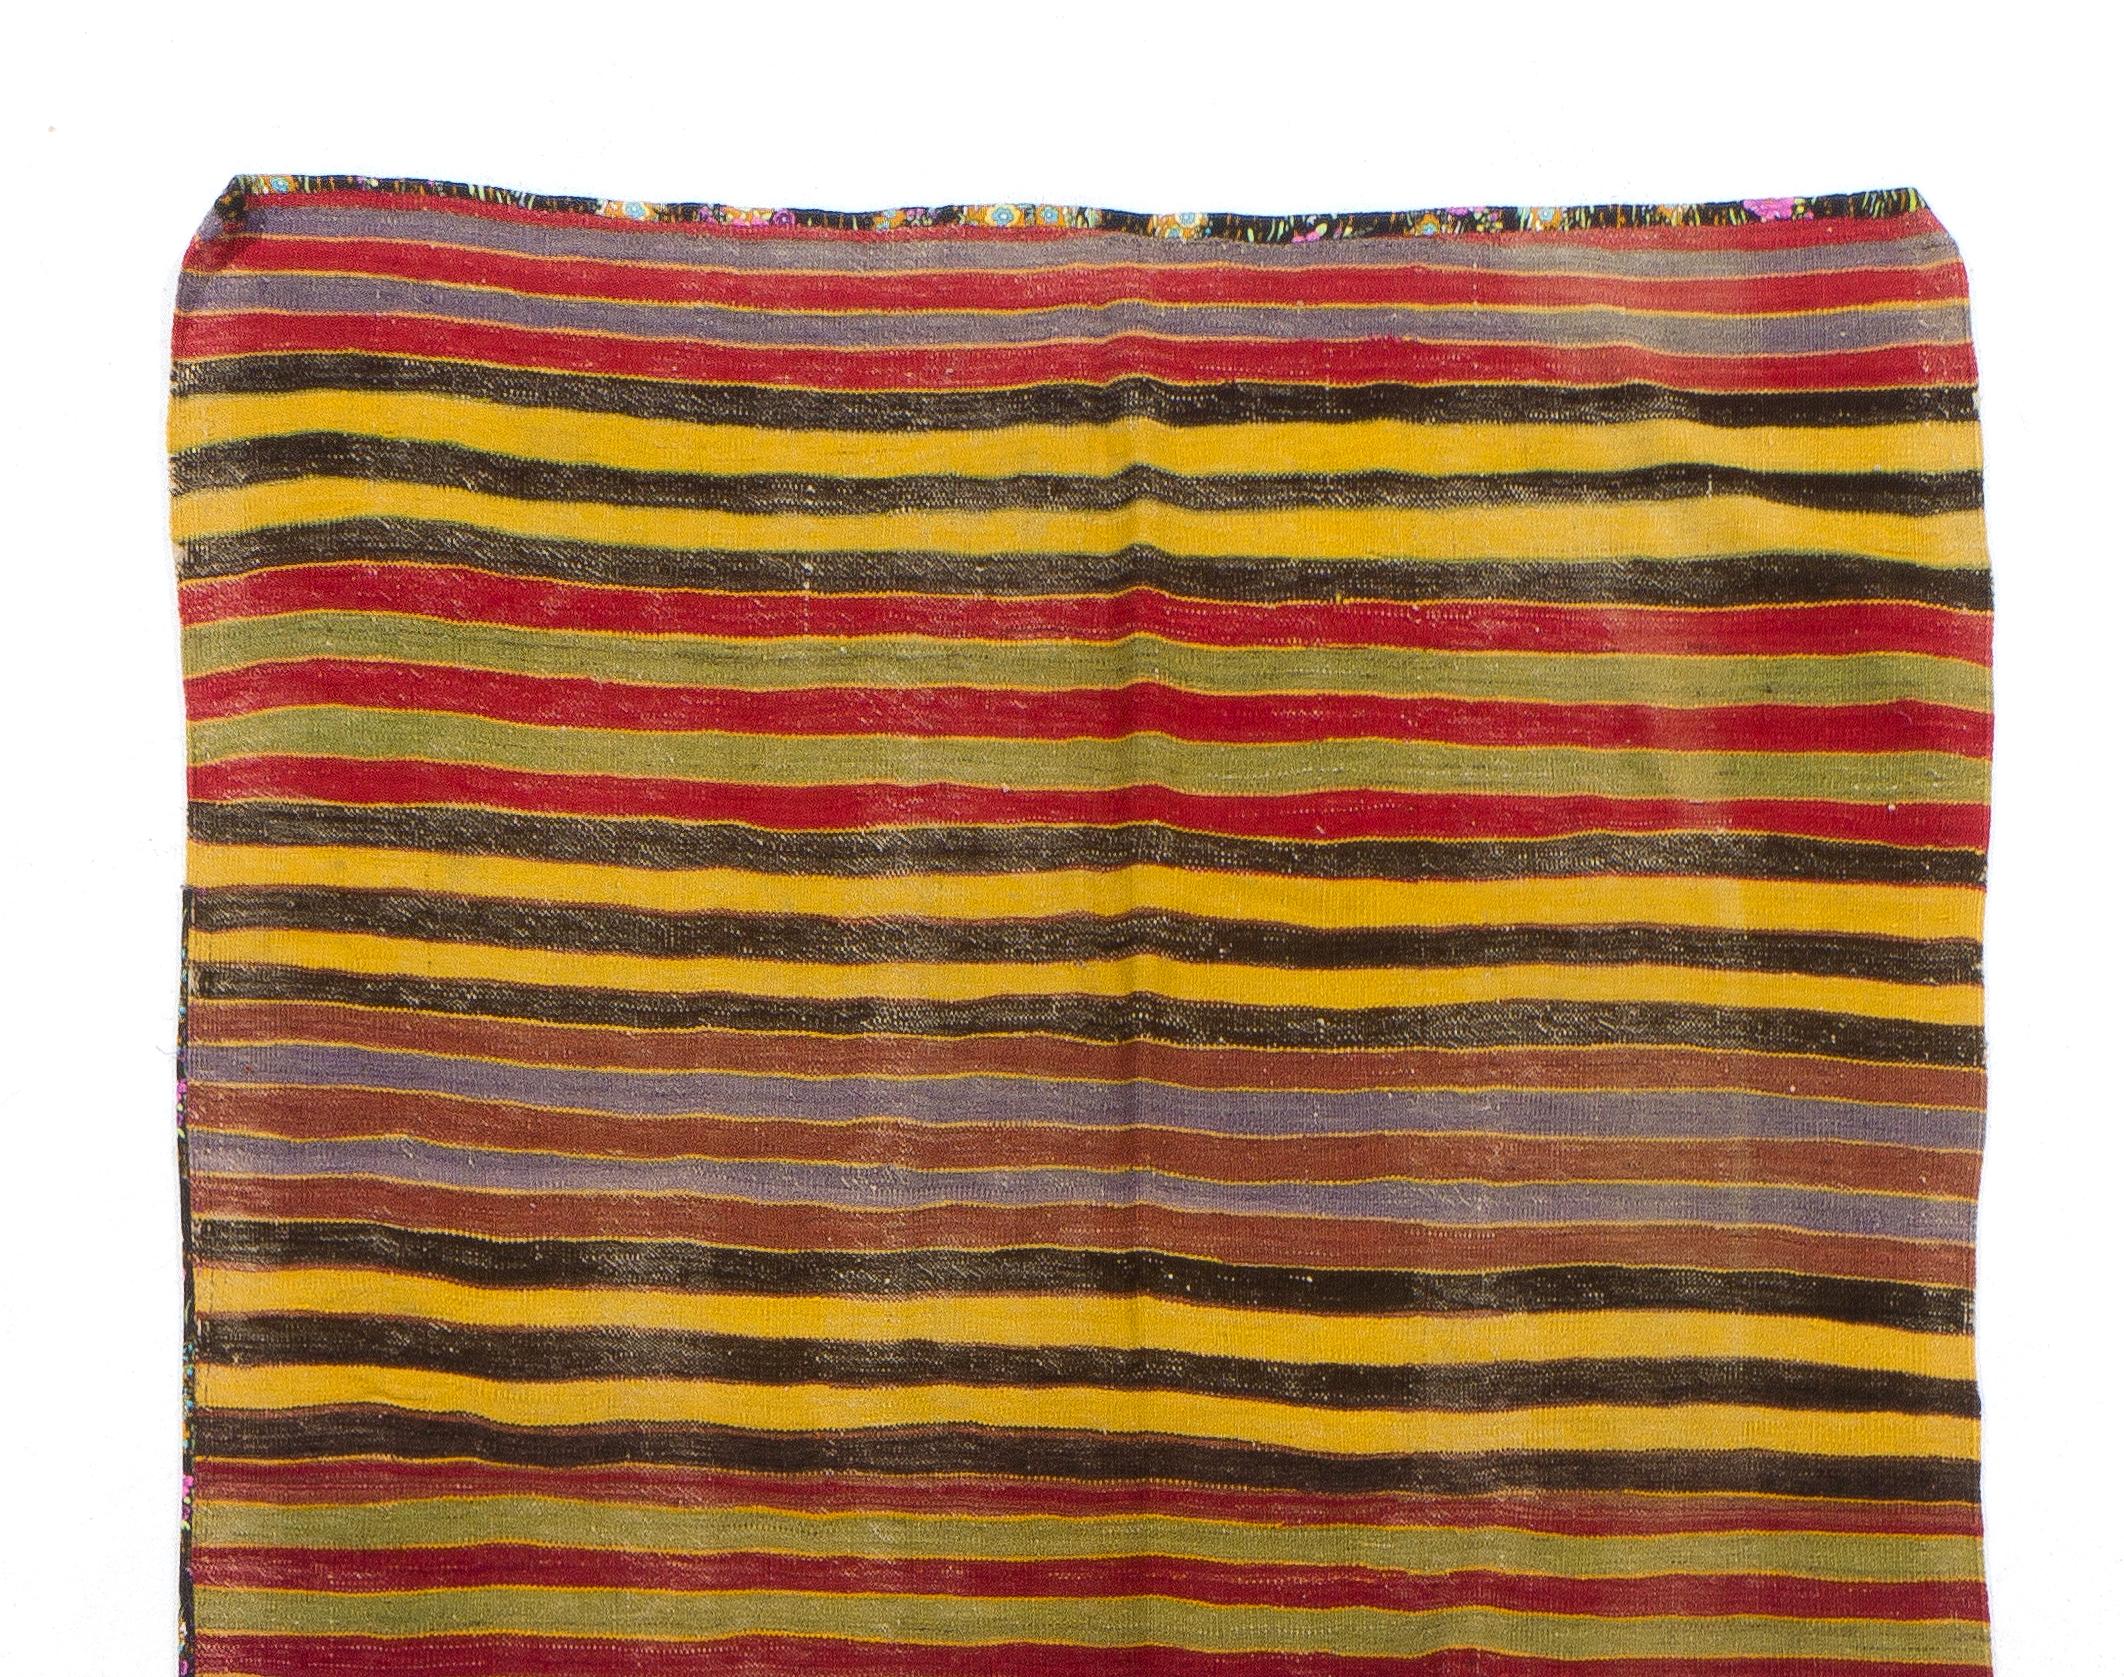 Vintage handwoven flat-weave (Kilim) with striped design, 100% wool. Size: 4.7 x 12.2 ft.
We can modify the dimensions if requested, i.e. make it shorter and/or narrower.
Reversible; both sides can be used.
Ideal for both residential and commercial